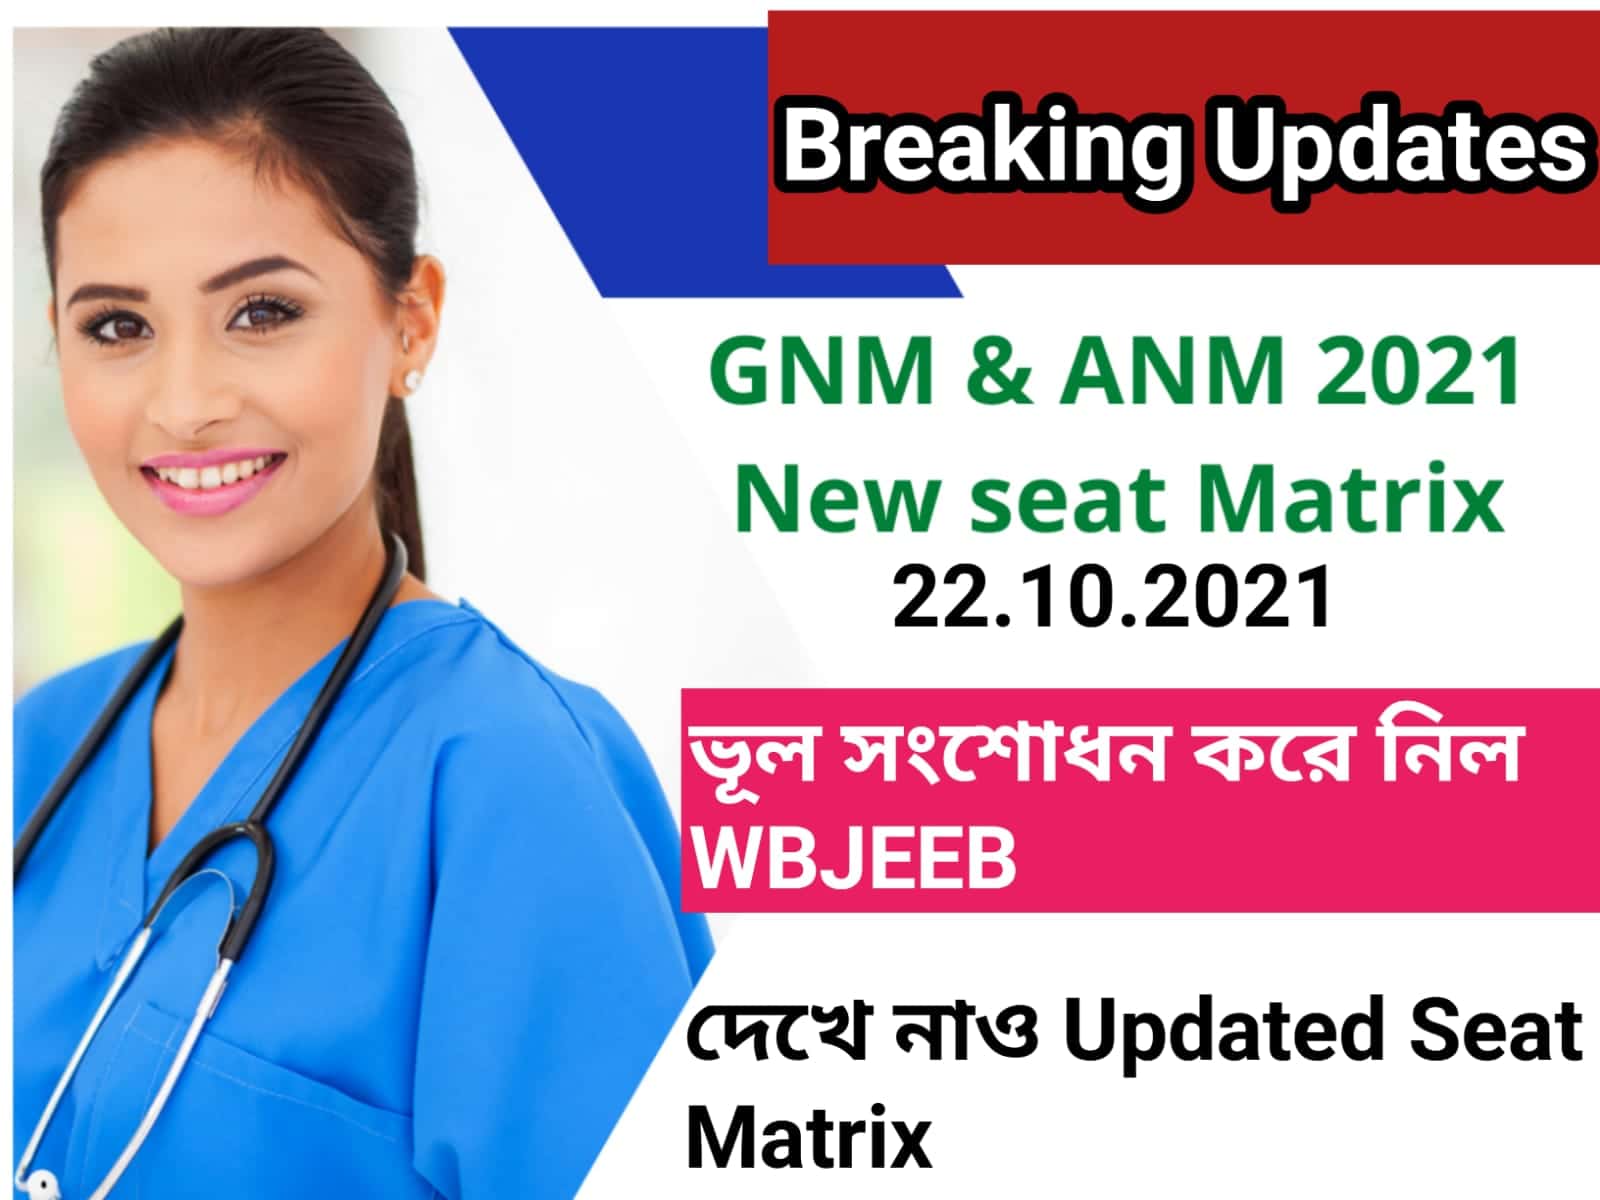 GNM & ANM 2021 New Seat Matrix | Equal Seat For Male & Female Candidate | GNM & ANM 2021 Counselling Date - Post Image